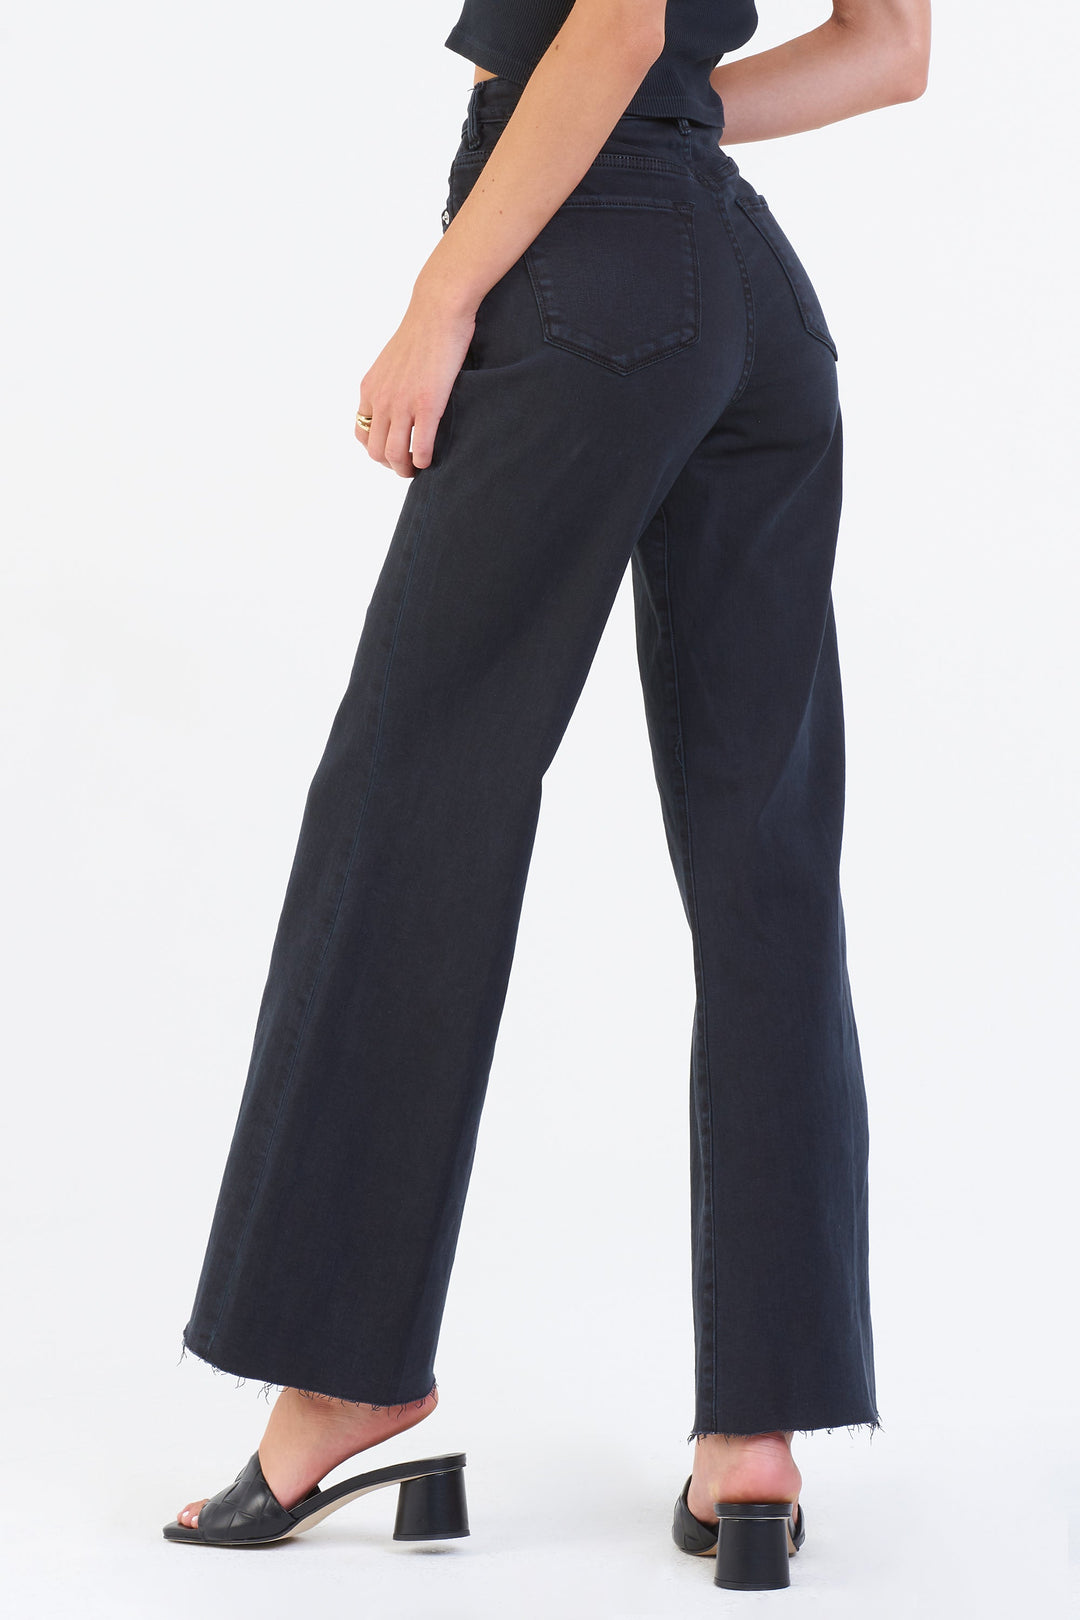 image of a female model wearing a FIONA SUPER HIGH RISE WIDE LEG JEANS BLACK JEANS